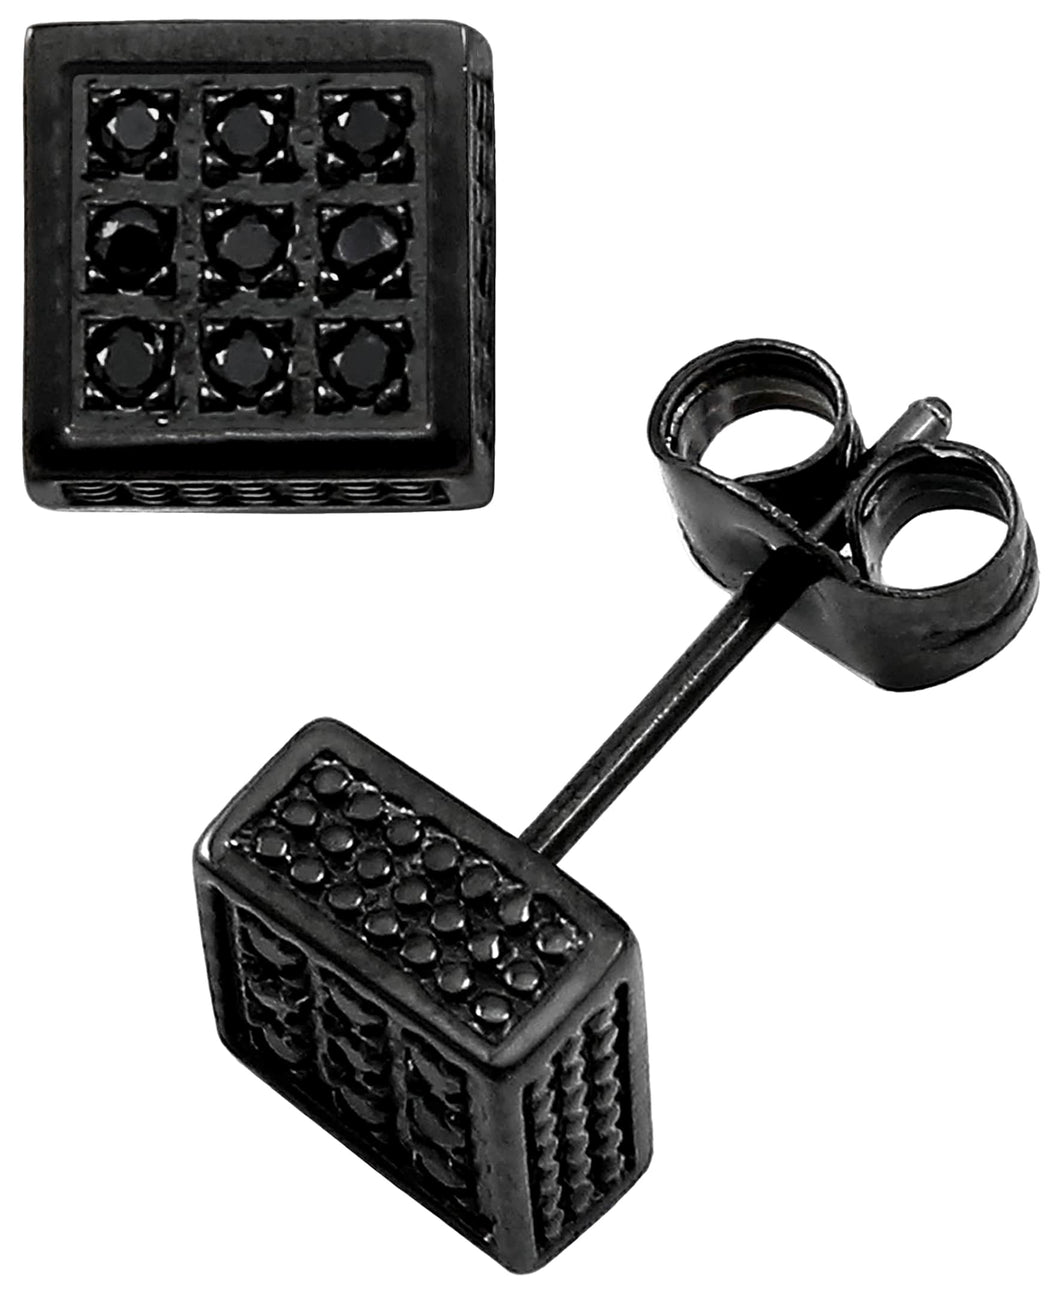 Sutton Stainless Steel Black Cubic Zirconia Square Stud Earrings